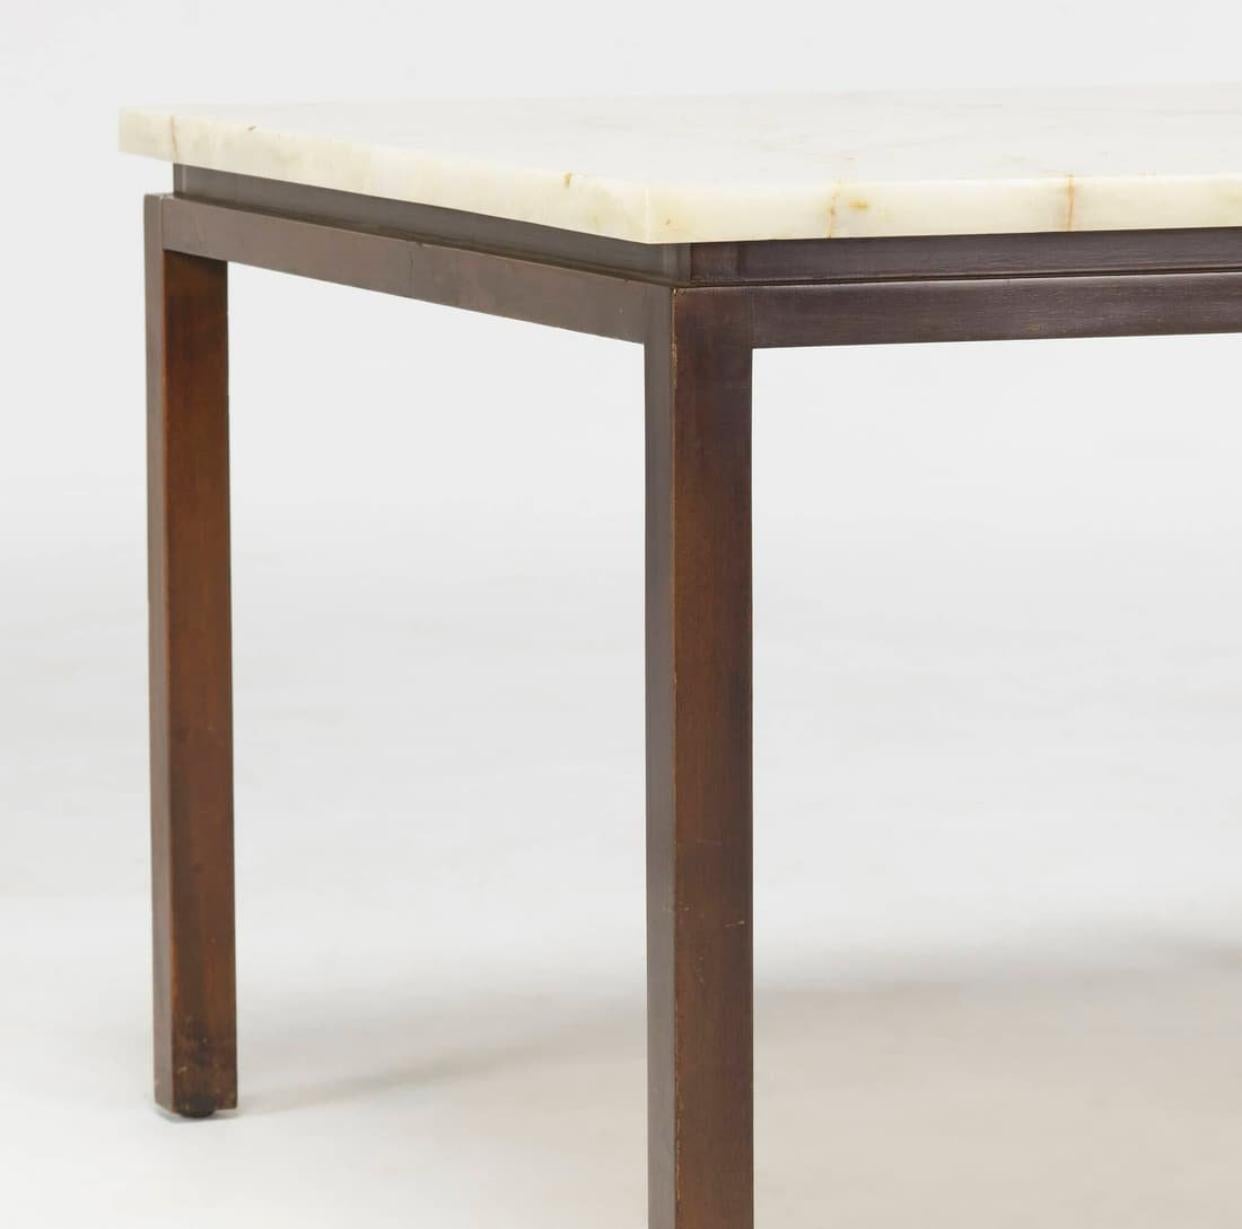 Harvey Probber
Custom Series 80 coffee table, model 82


Harvey Probber, Inc.
USA, c. 1962
mahogany, white onyx
20 h x 31 w x 31 d in (51 x 79 x 79 cm)

Table features a custom onyx top; production models were made with wood veneers.

Provenance: